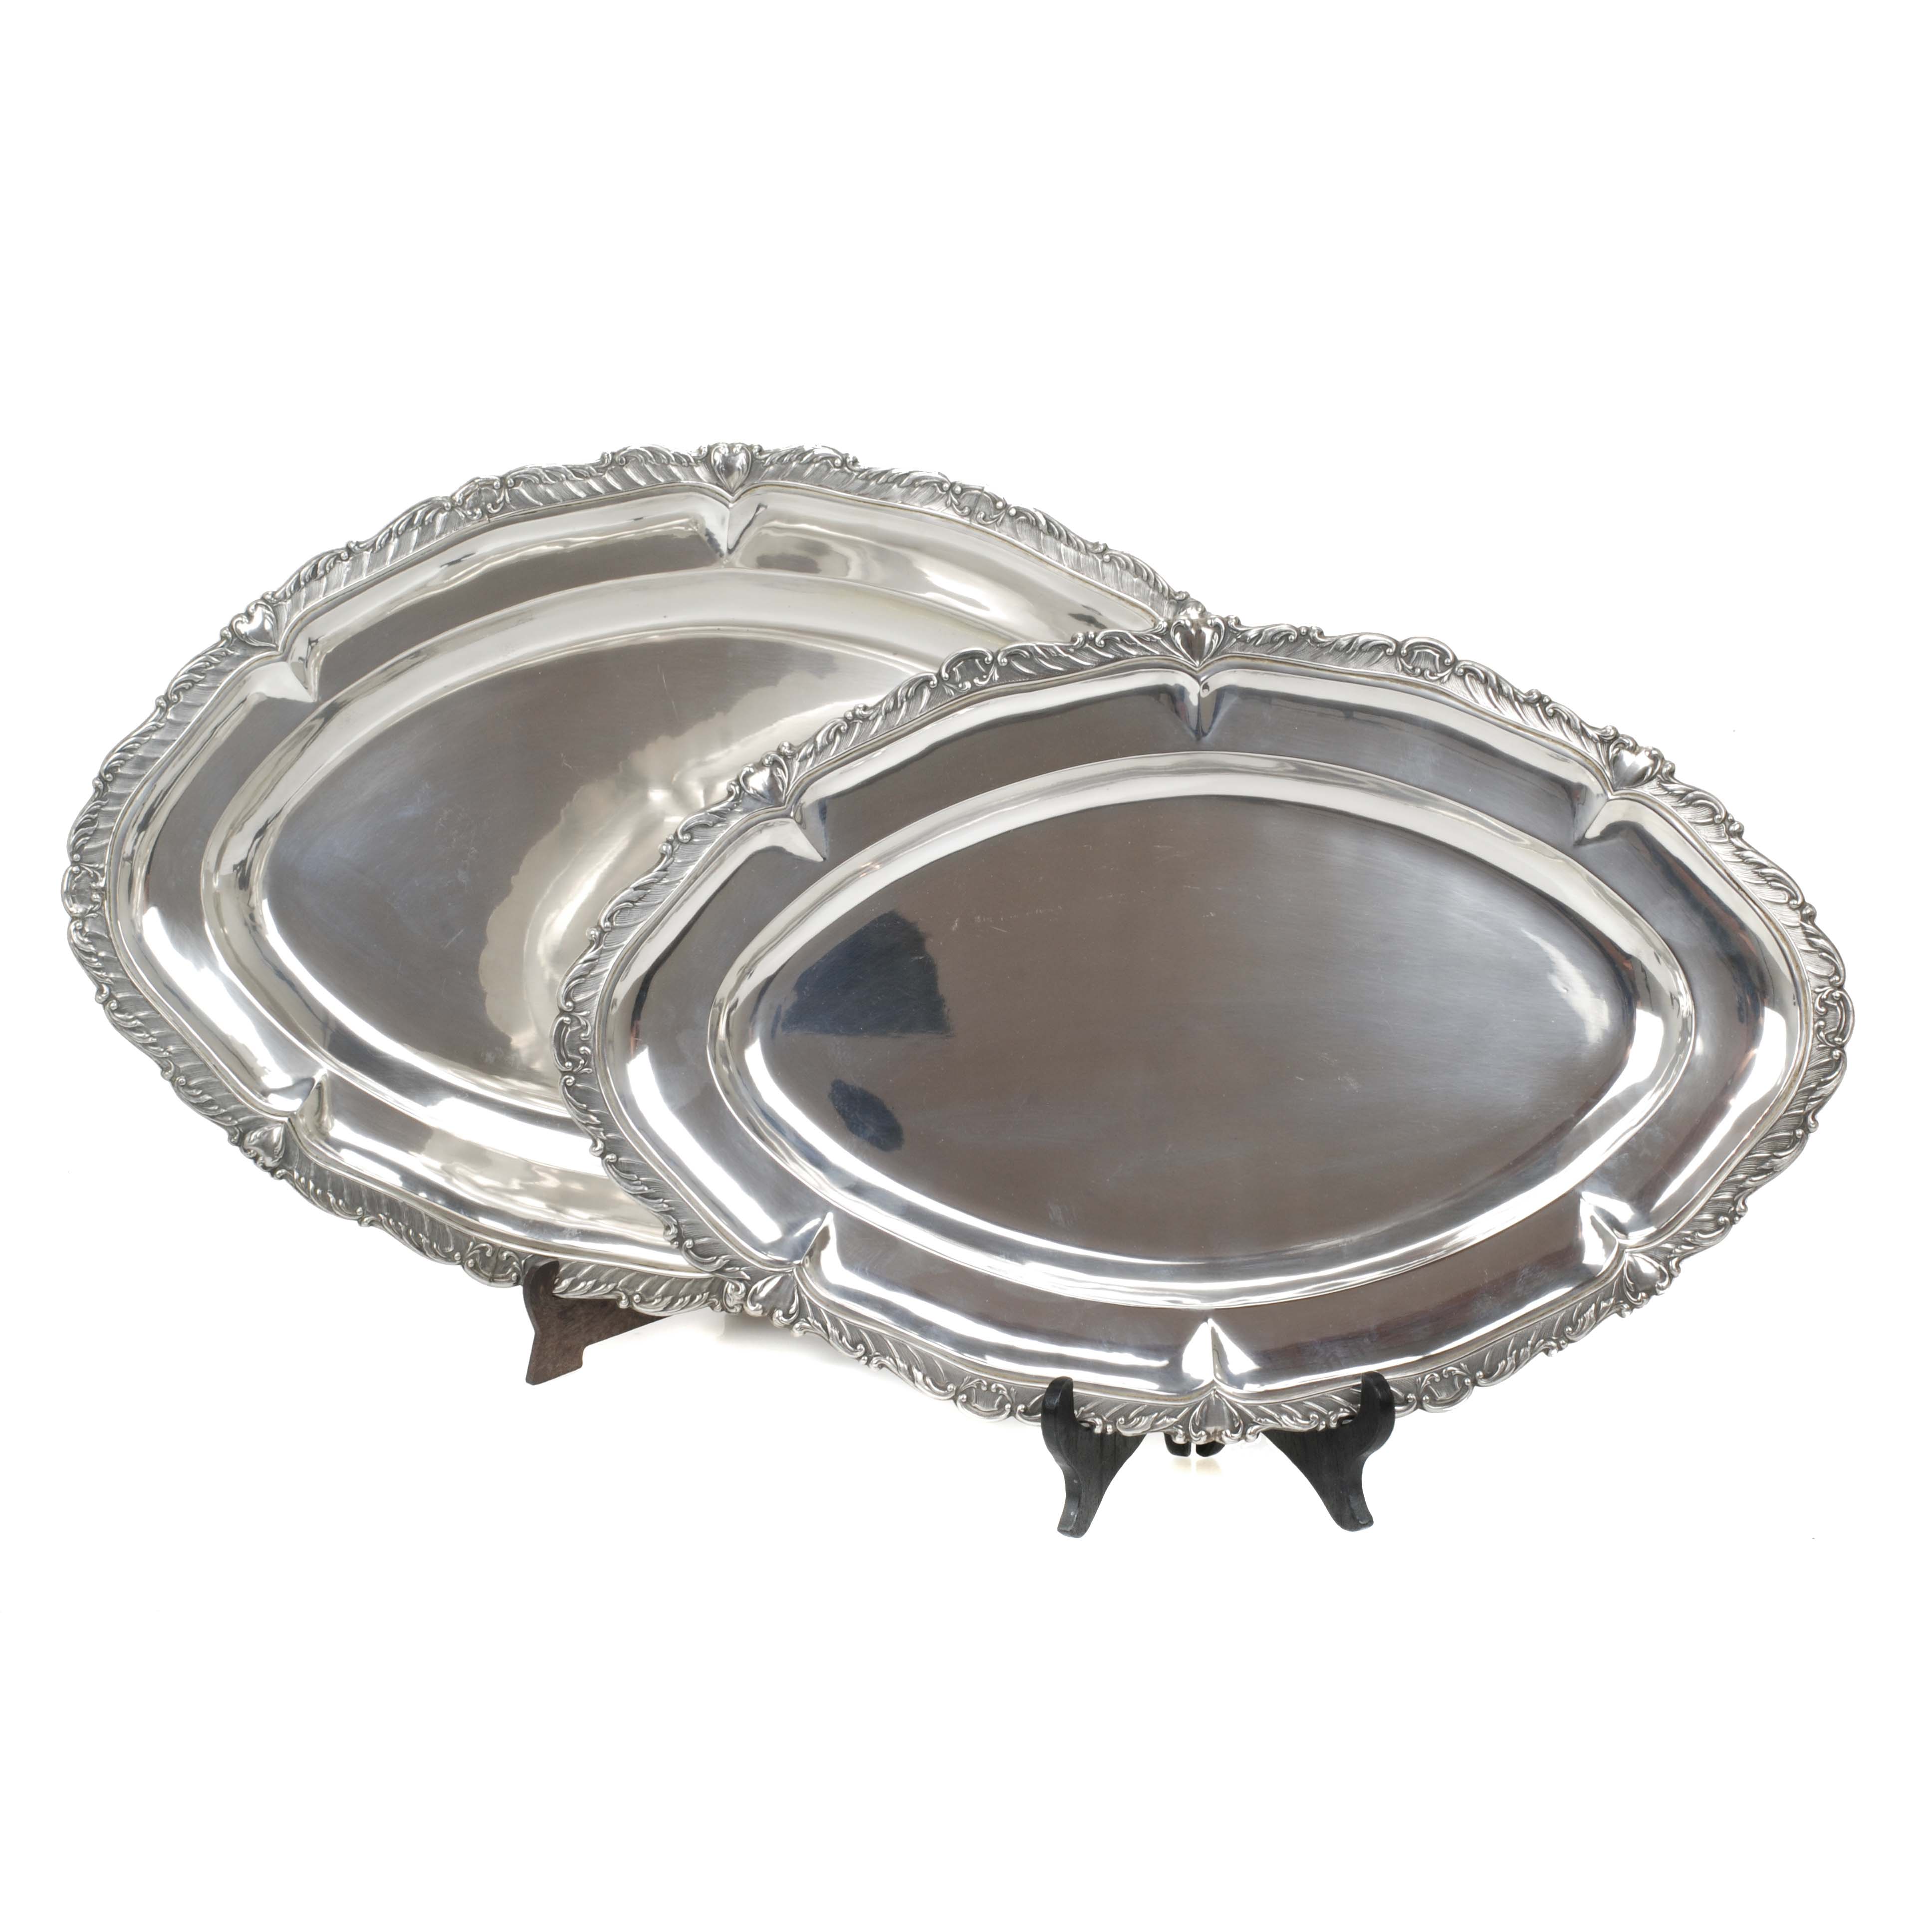 COUPLE OF SPANISH SILVER TRAYS, MID. 20TH CENTURY.